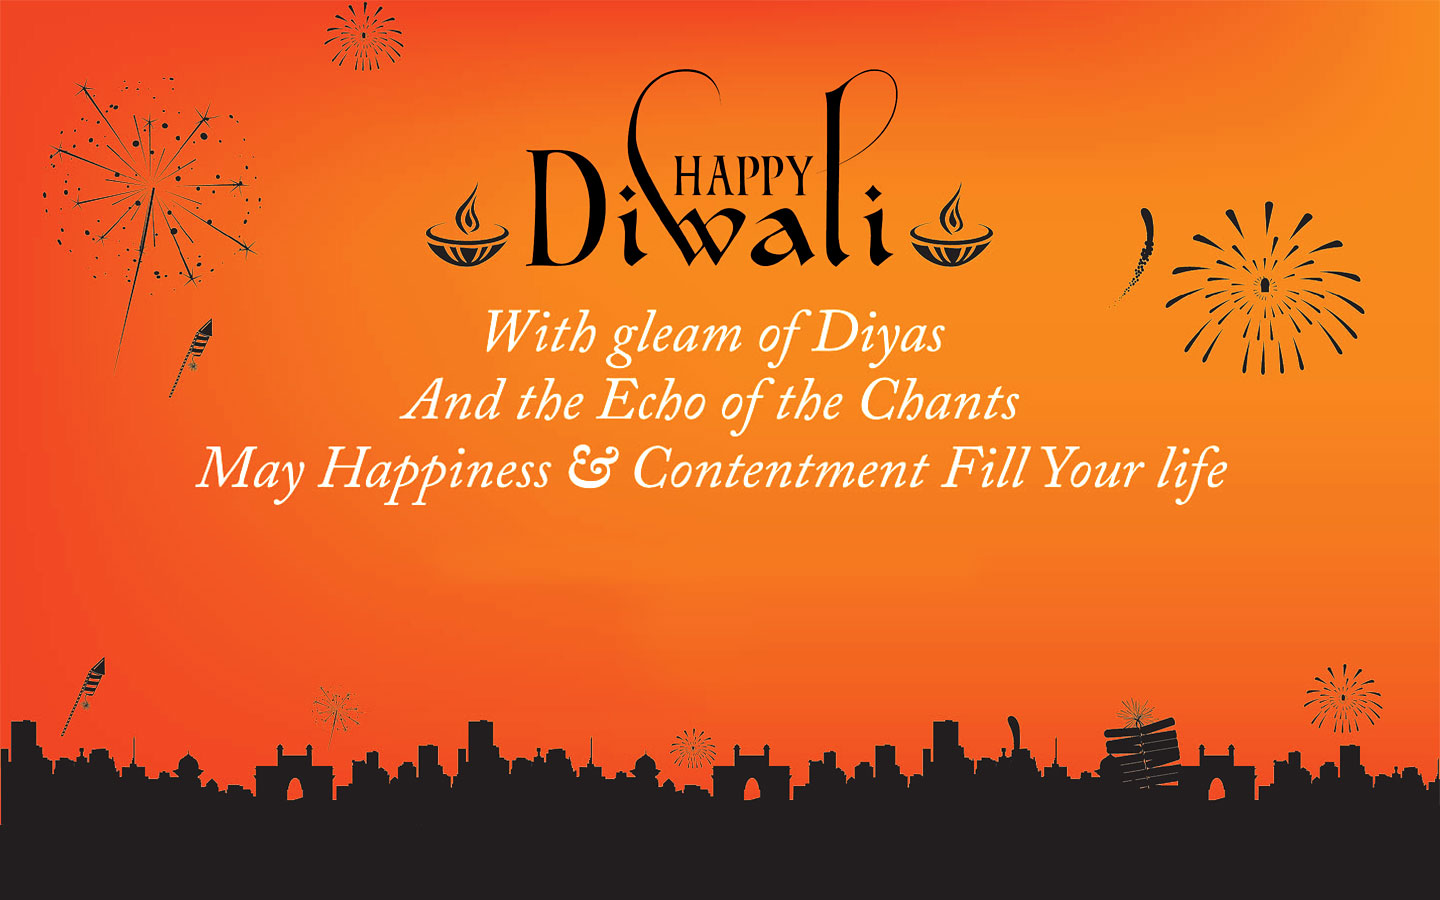 Diwali with Quote